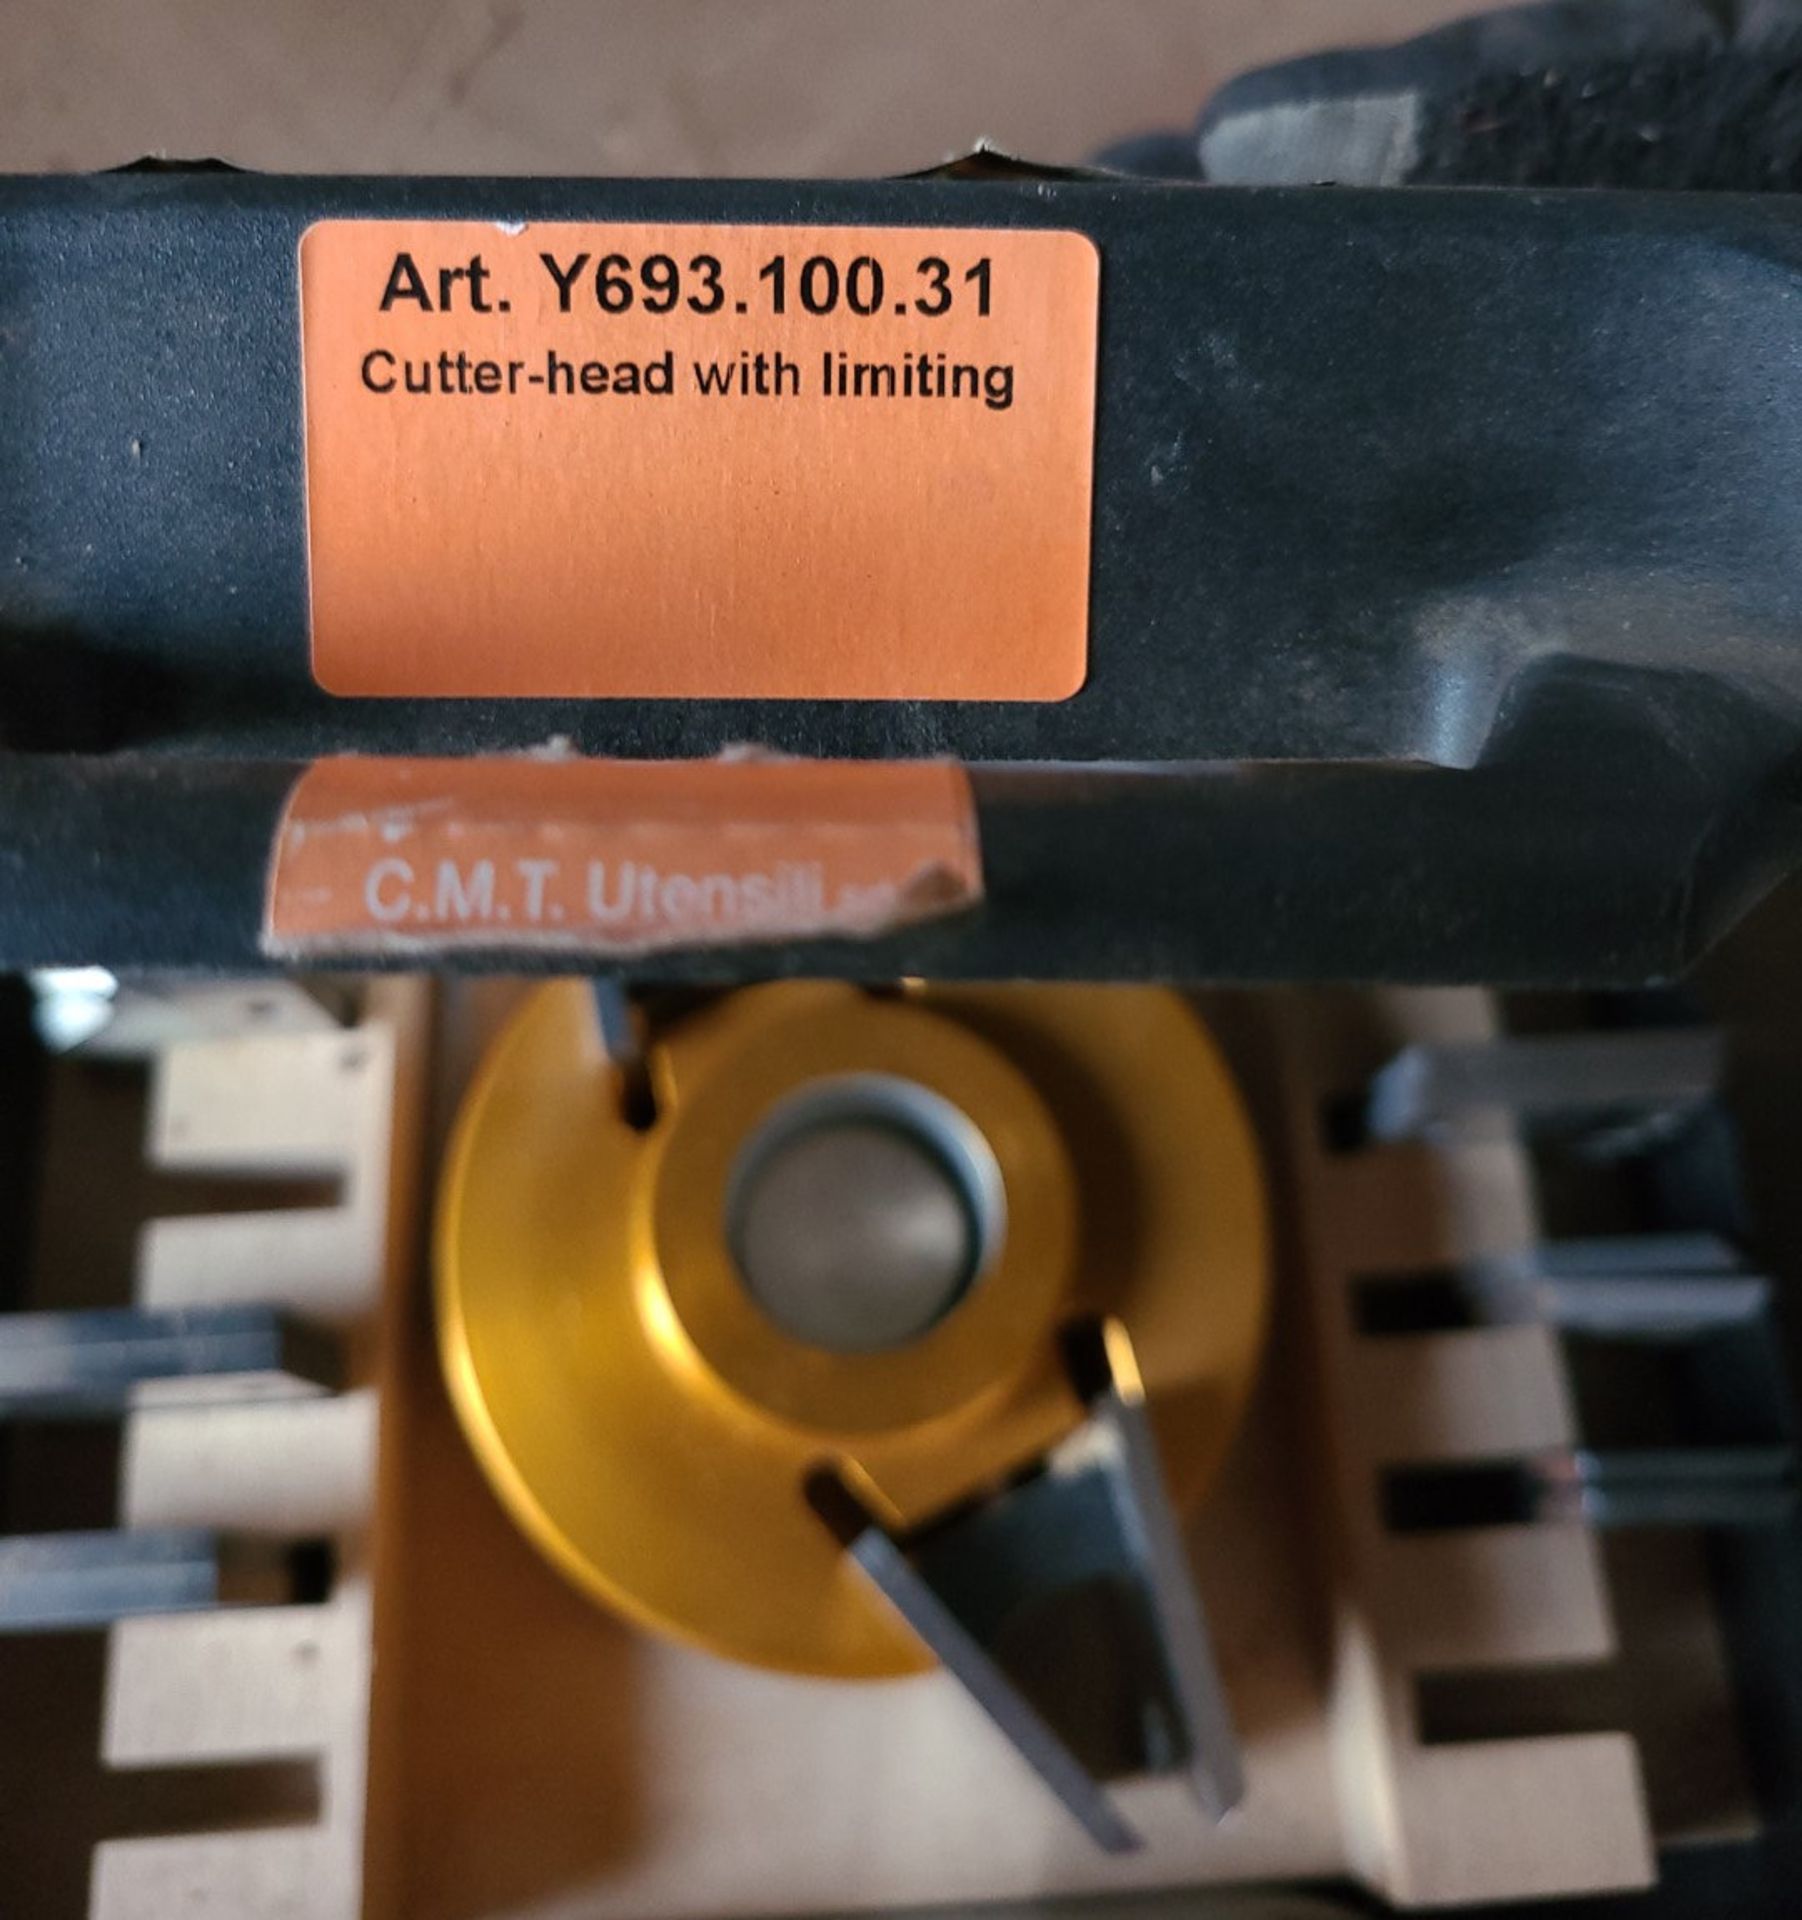 1 x Cmt Utensili Art Y693.100.31 Cutter Head With Limiting In Case (Profile Block 1 1/4") - Ref: - Image 4 of 5